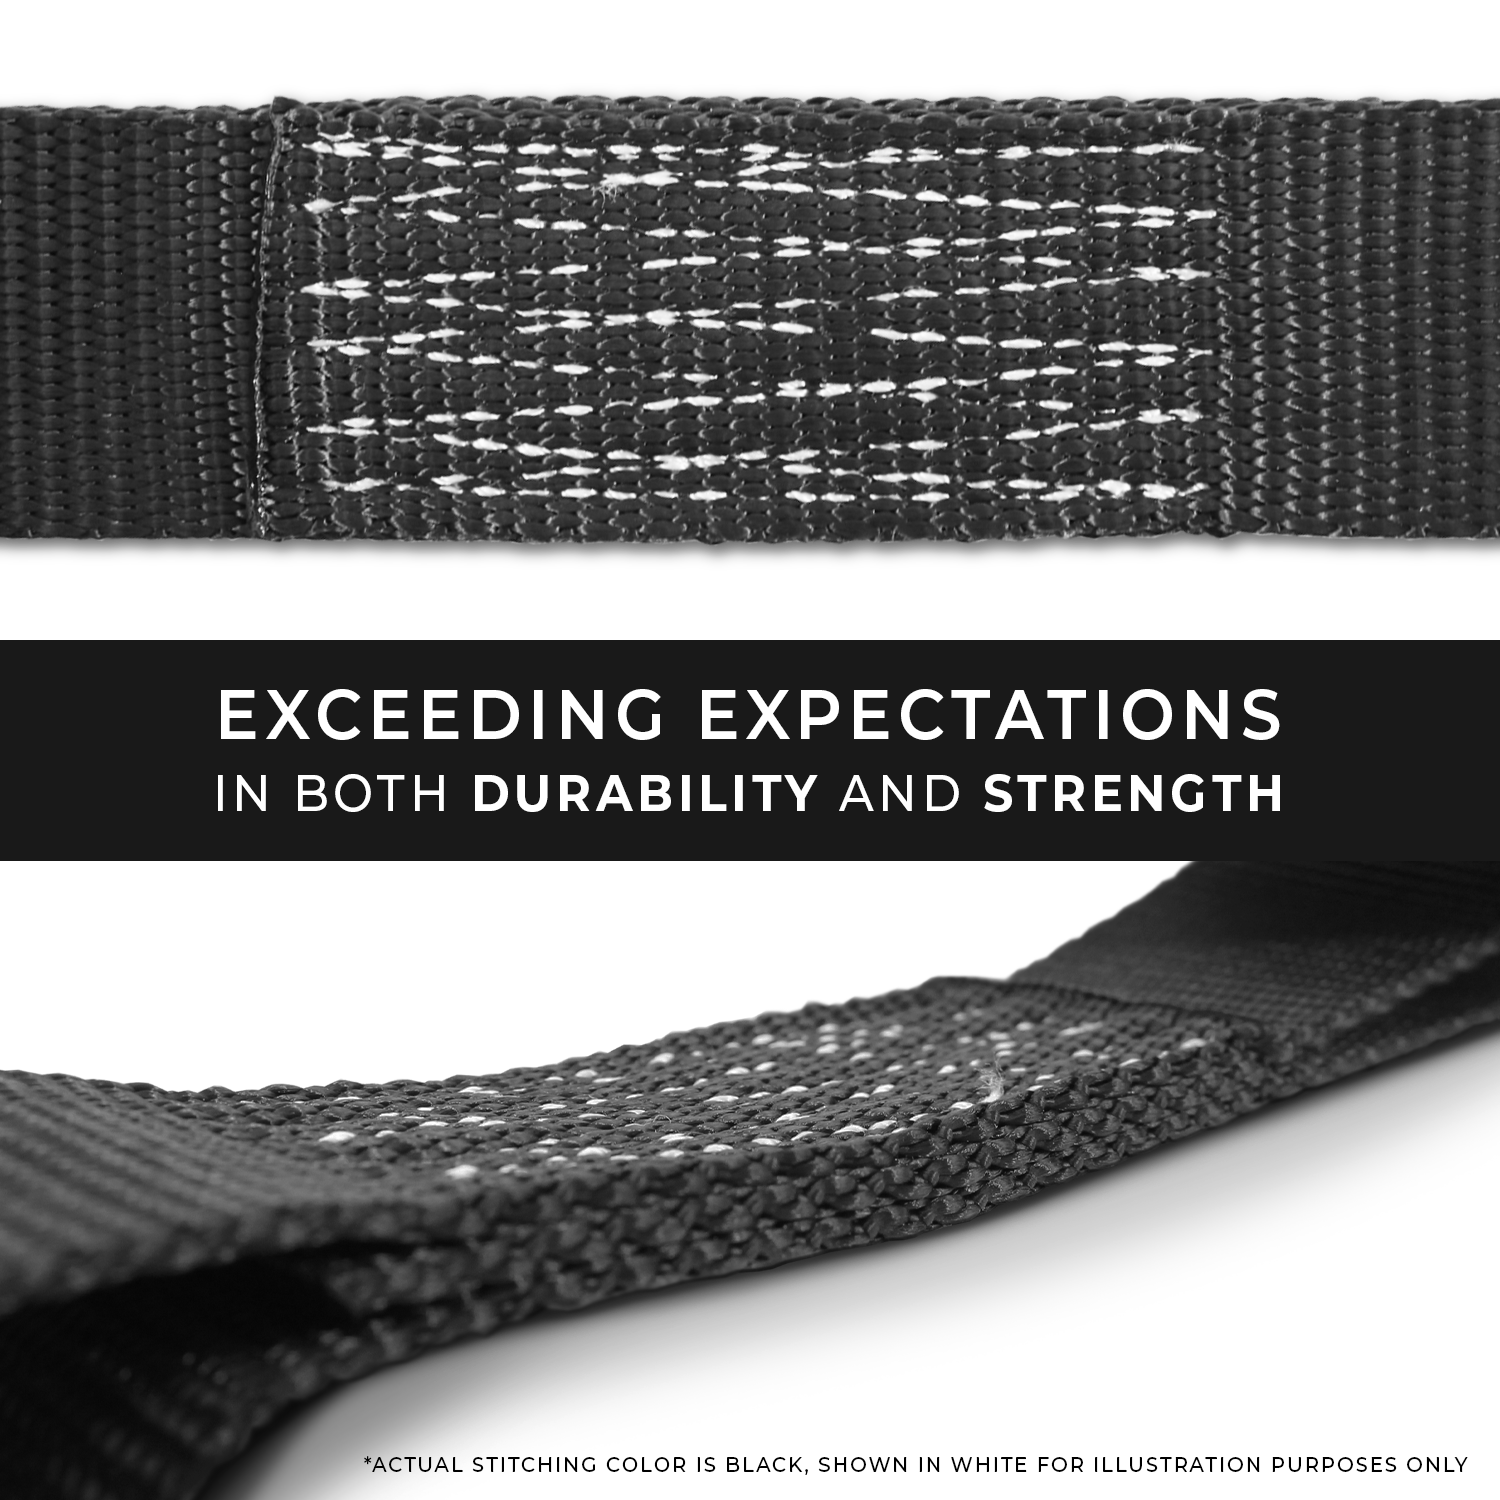 HEAVY DUTY RATCHET STRAP WEBBING AND HIGH STRENGTH STITCHING